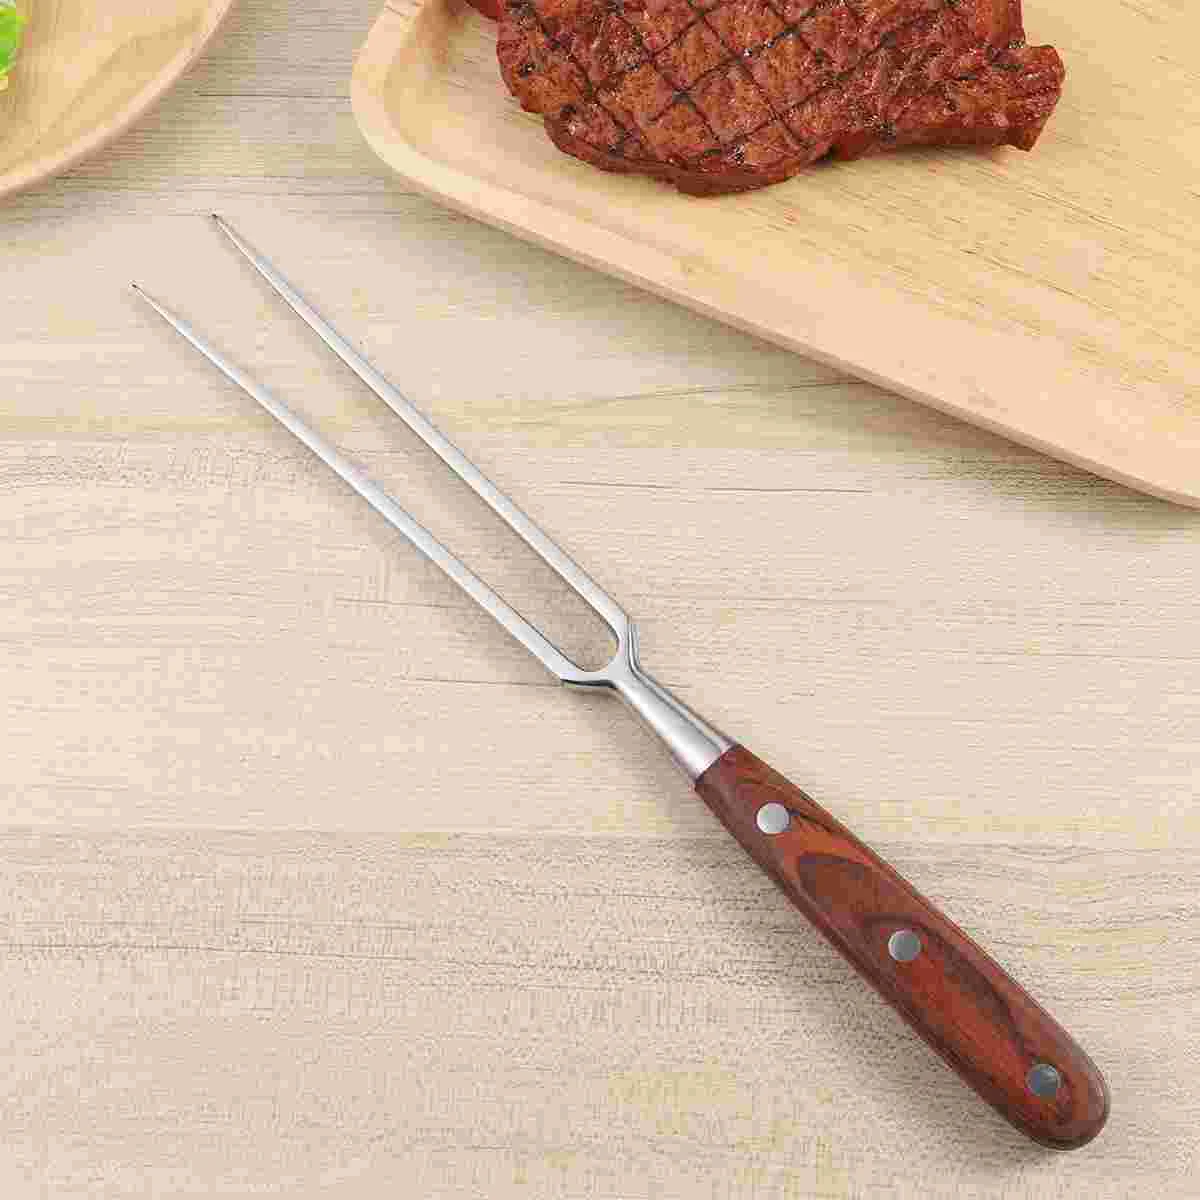 

Fork Forks Meat Bbq Steel Stainless Grill Sticks Roasting Handle Grilling Turkey Kitchen Skewers Cooking Prong Barbecue Steak